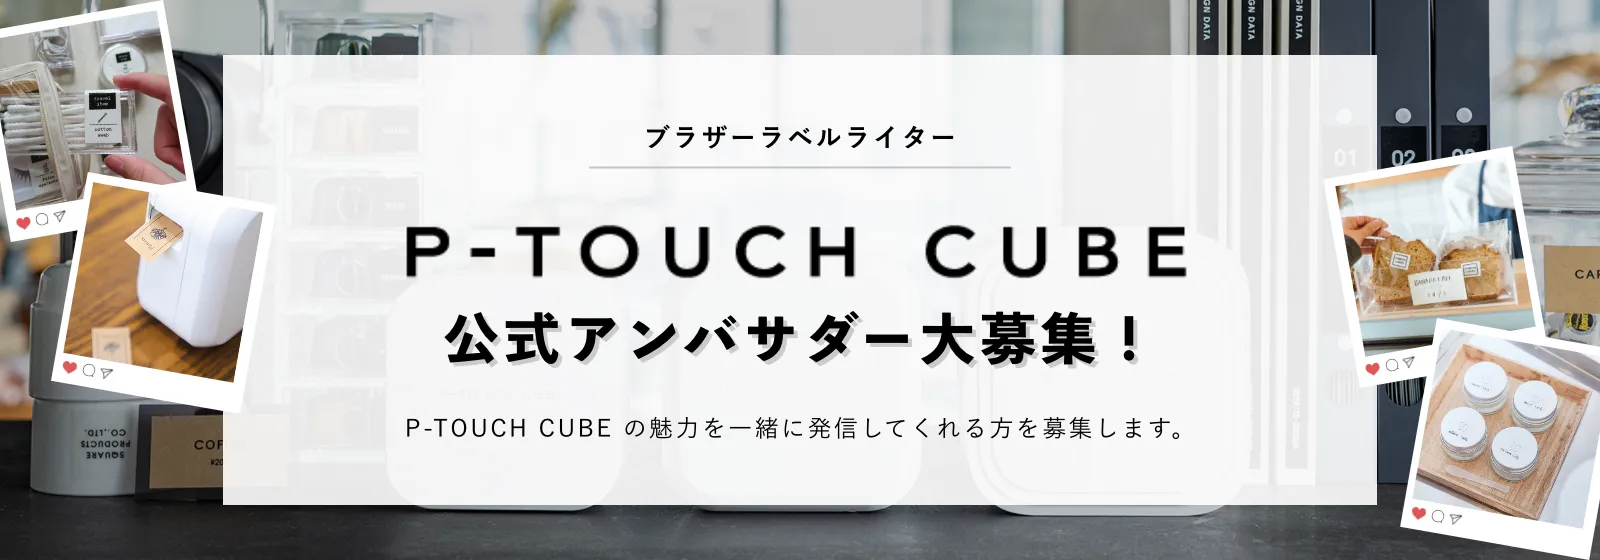 P-TOUCH CUBE 公式アンバサダー大募集